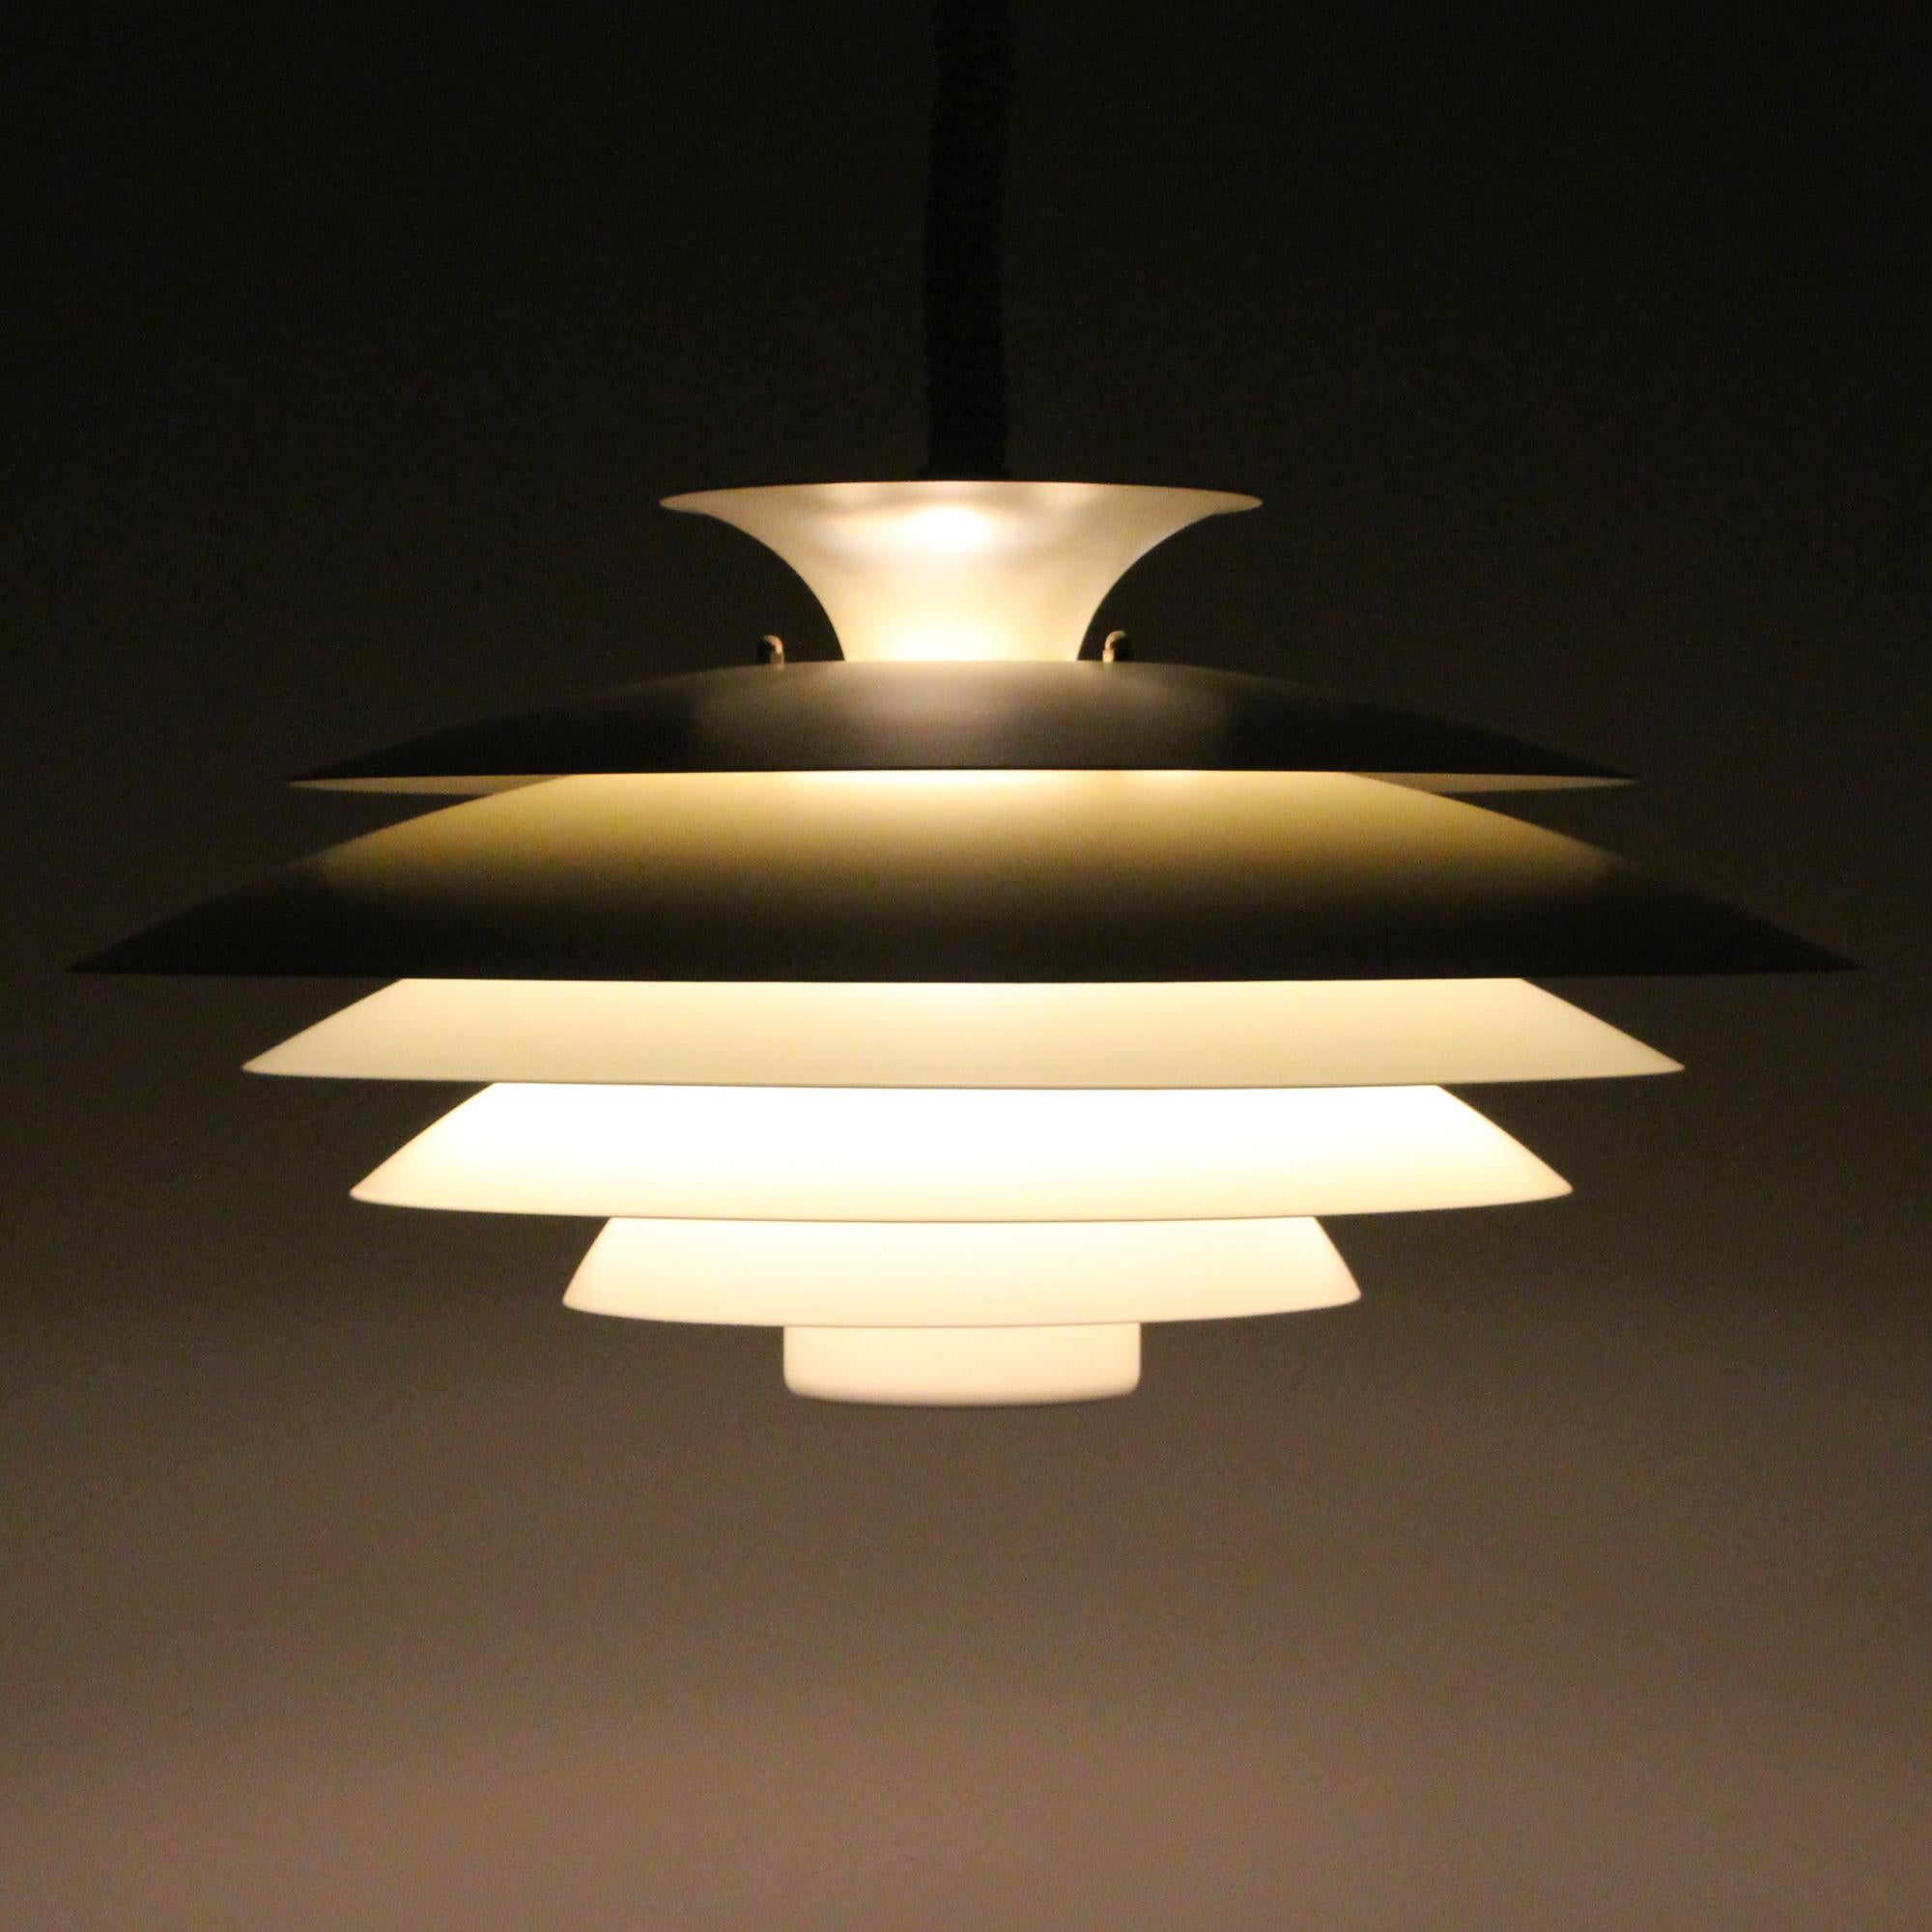 NO. 52580, large white lamp by Danish Form-Light in the 1980 - stylish white hanging light in very good vintage condition.

A multi-layered pendant with five circular white powder coated metal shades, placed on white/yellowish lacquered metal